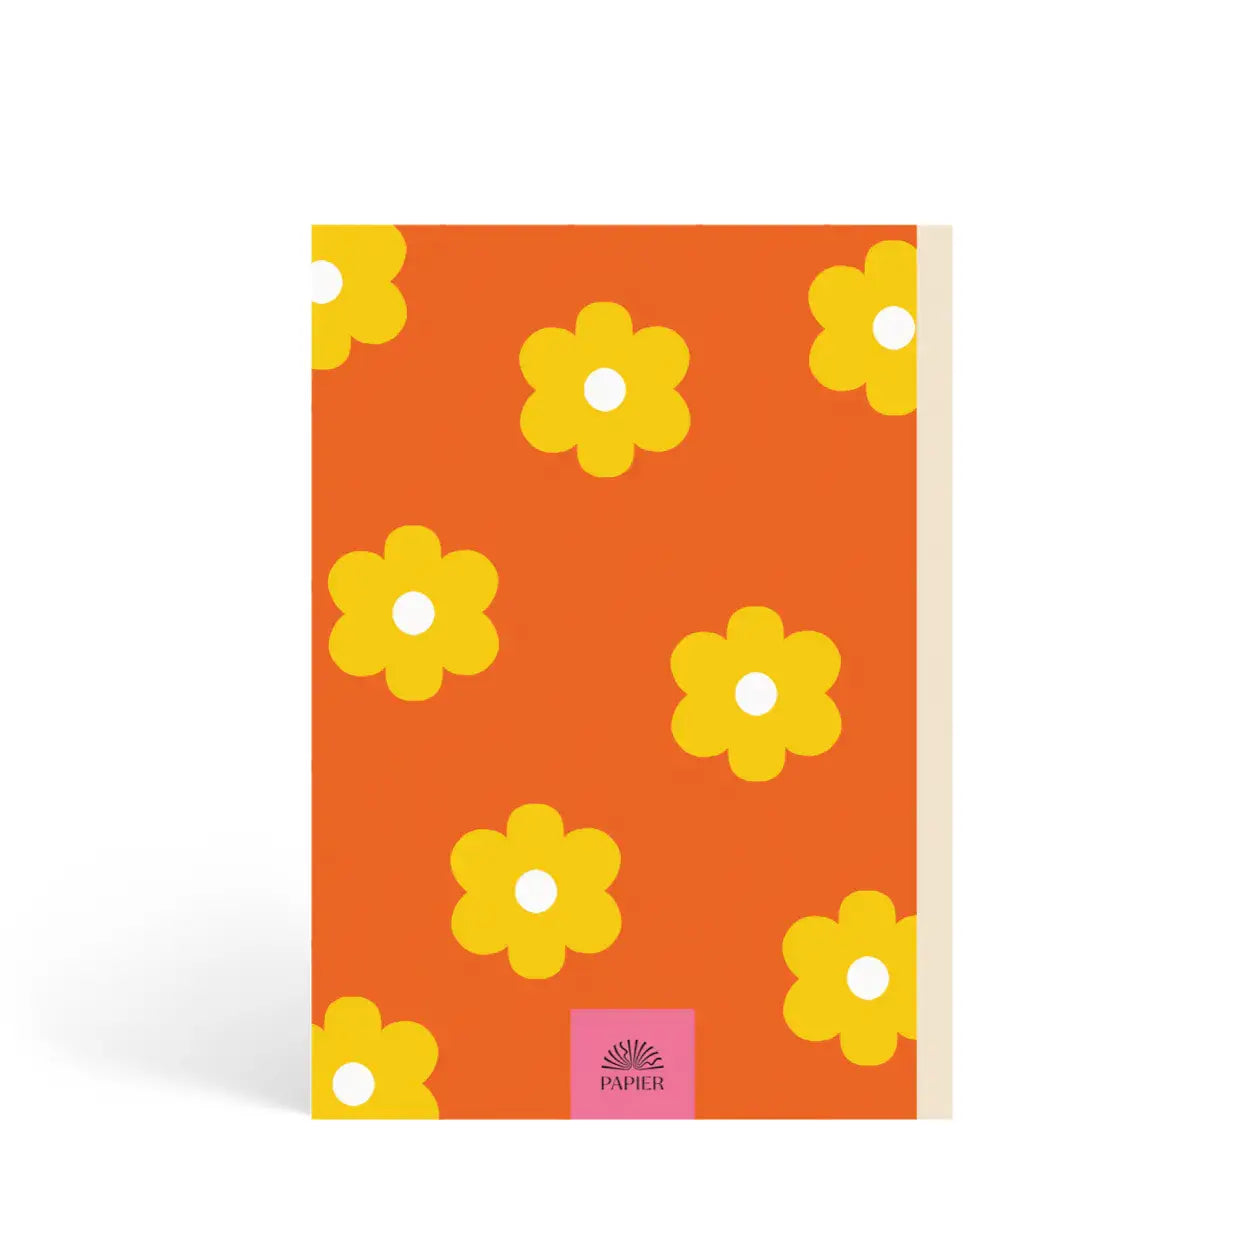 Papier Slow Down Wellness Journal | Prelude and Dawn Los Angeles, CA